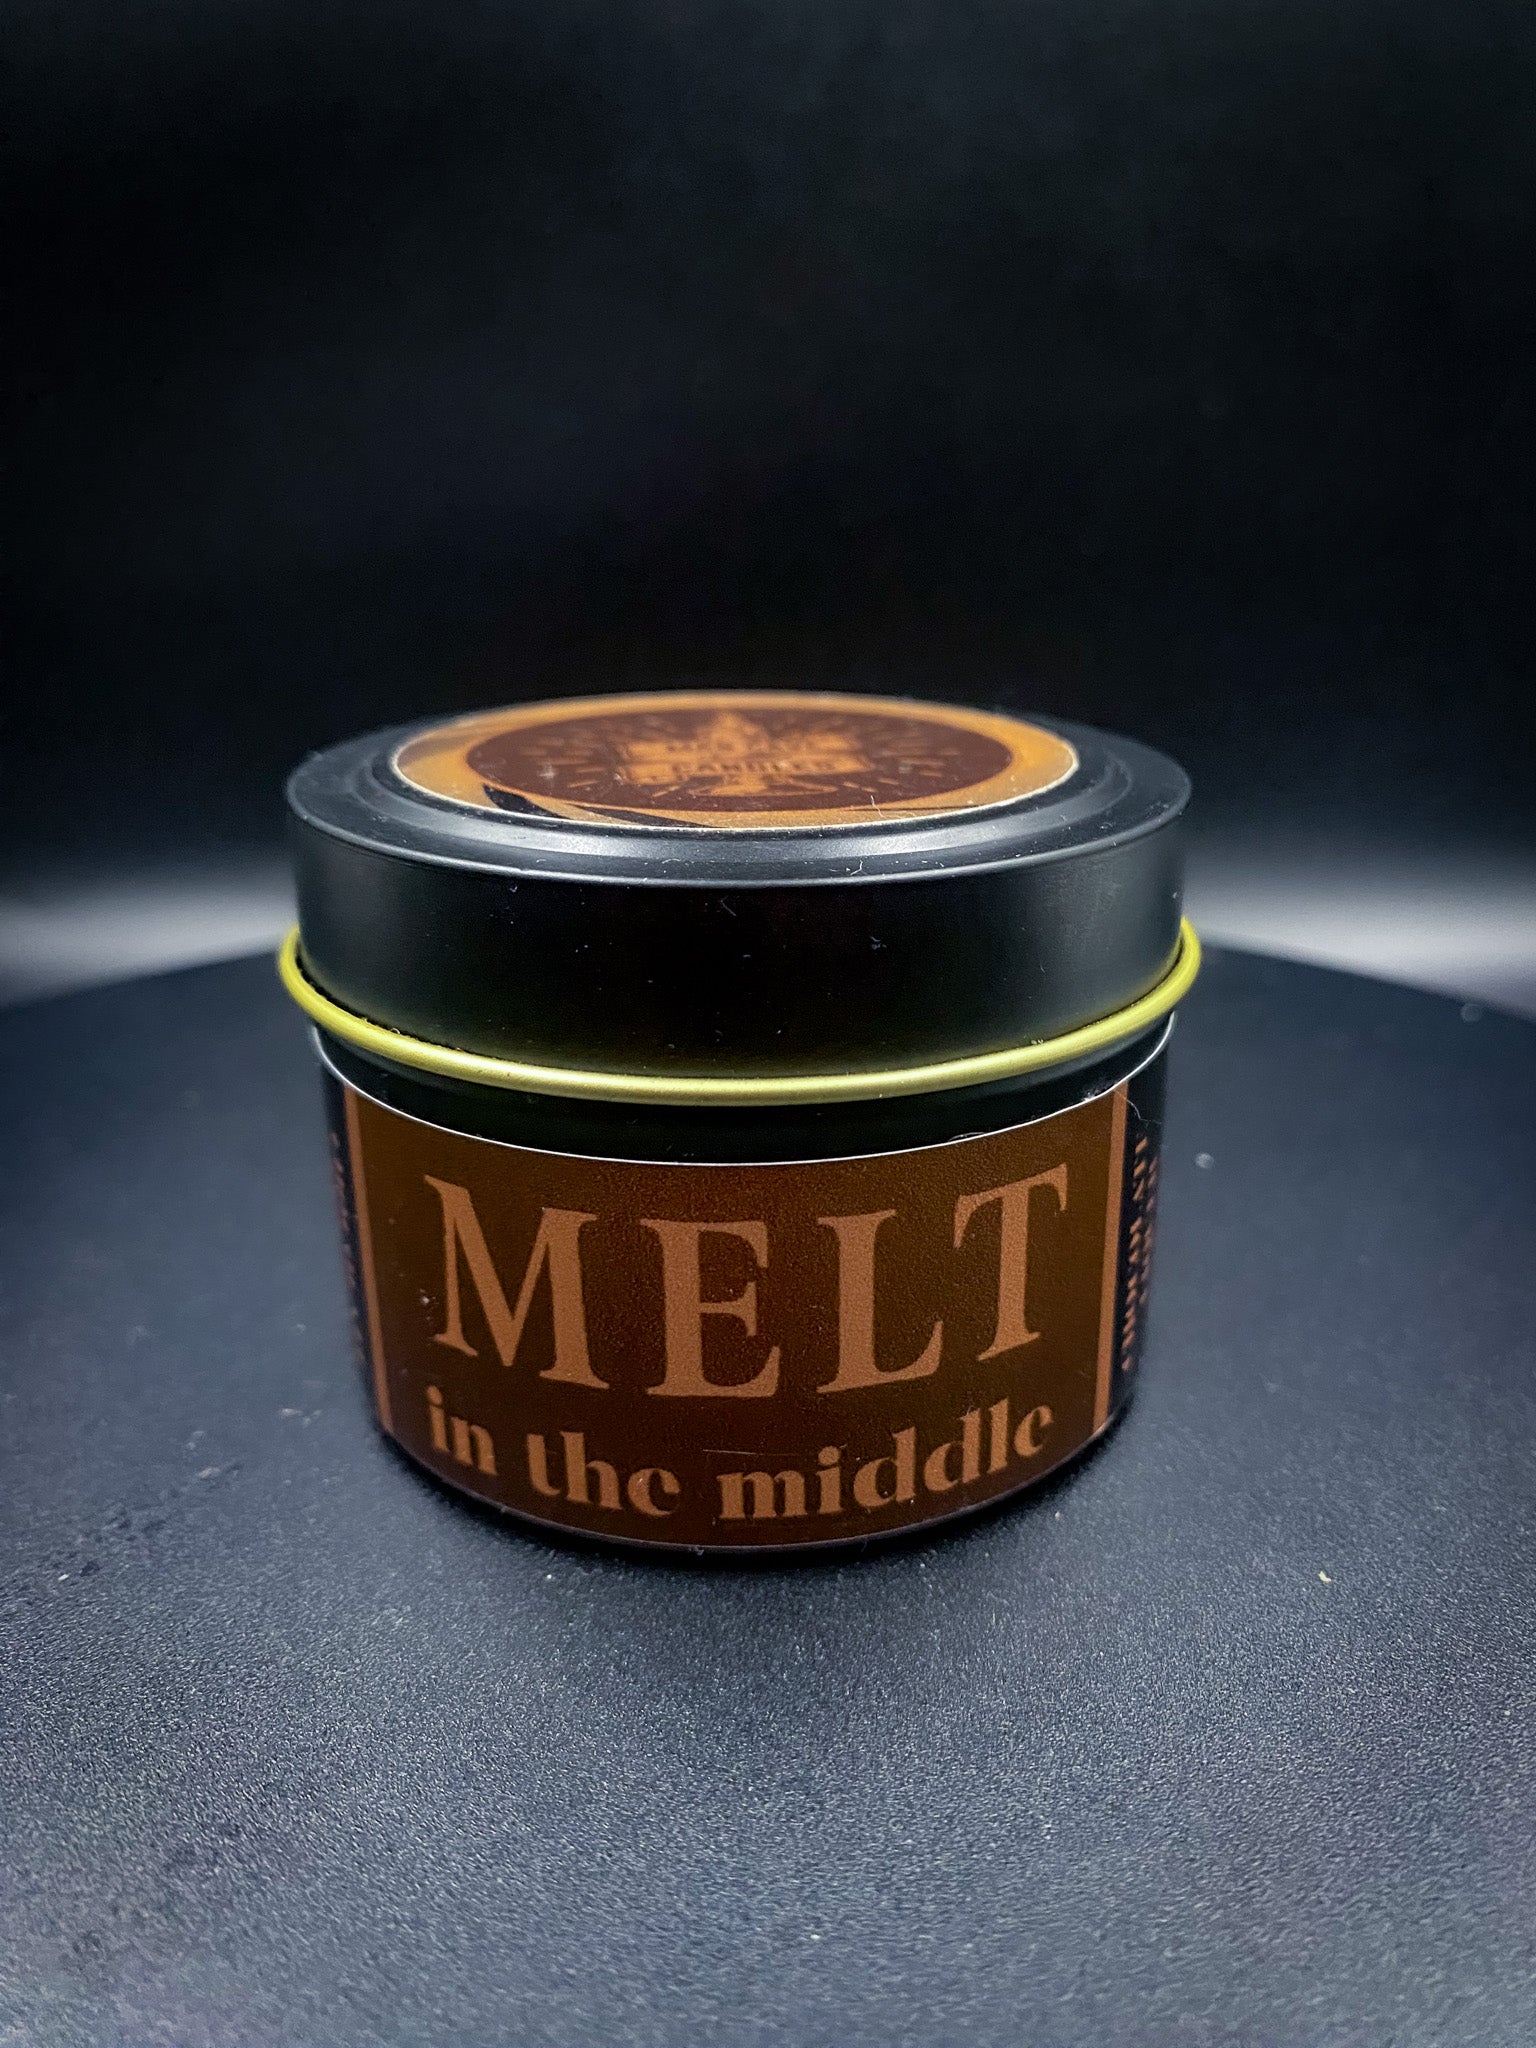 Melt in the Middle - Chocolate Liqueur Scented Man Candle